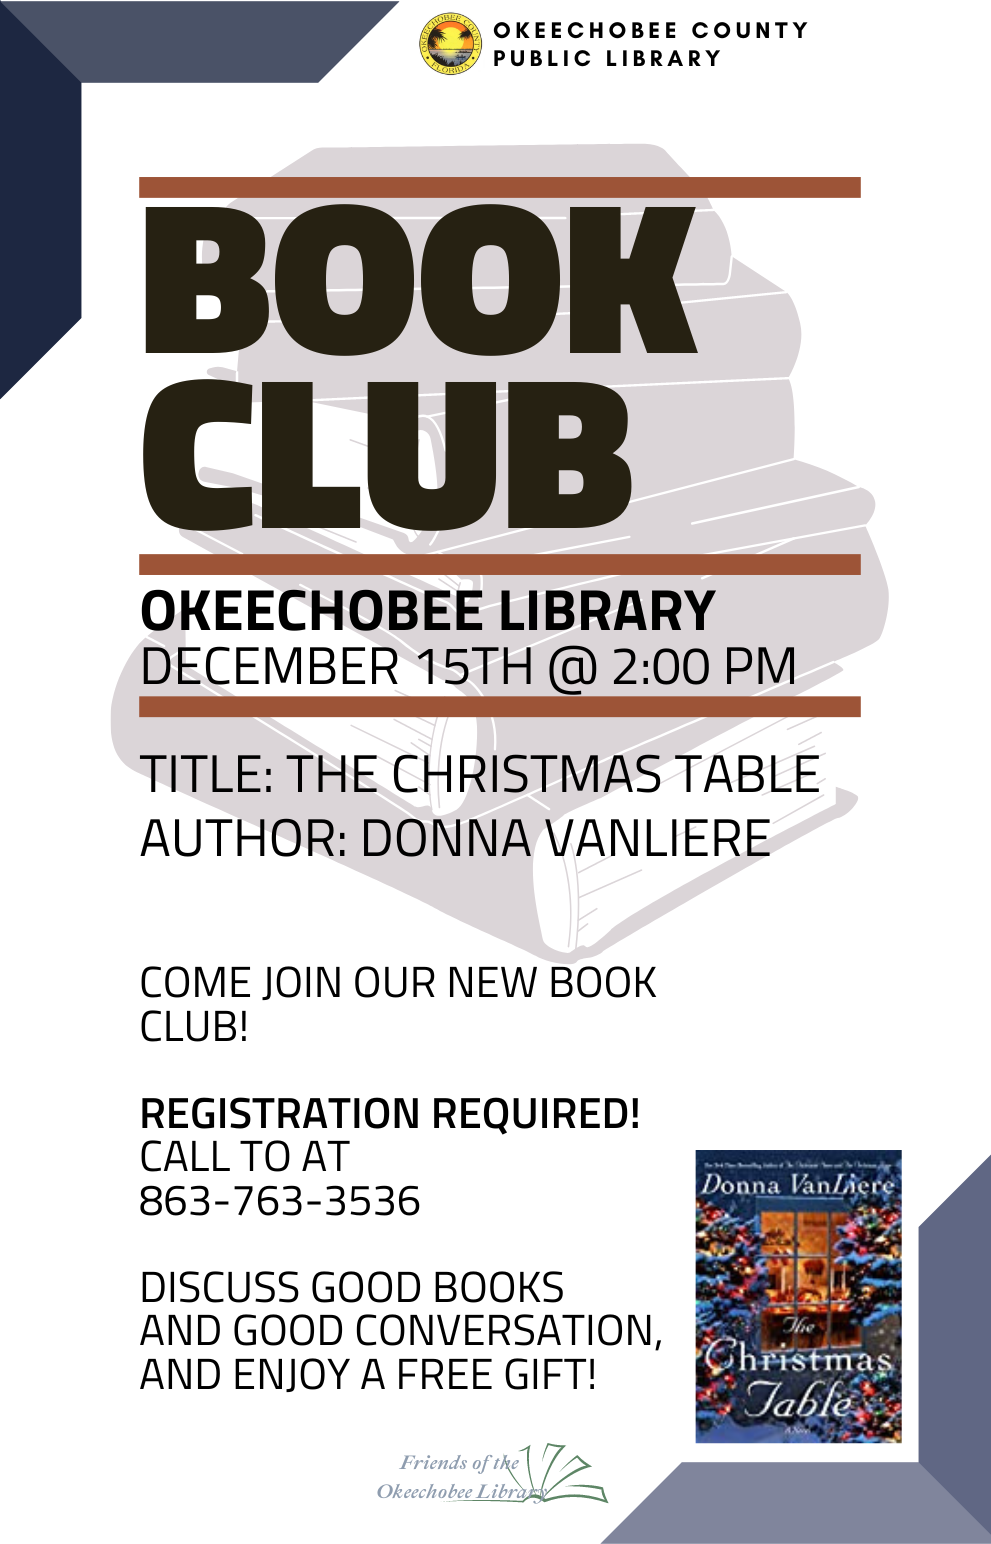 "Join us at the Okeechobee Library on Thursday, December 15th at 2pm for Book Club! This month we will be discussing 'The Christmas Table' by Donna Vanliere. Also every month we have a small FREE gift bag for attendees!"